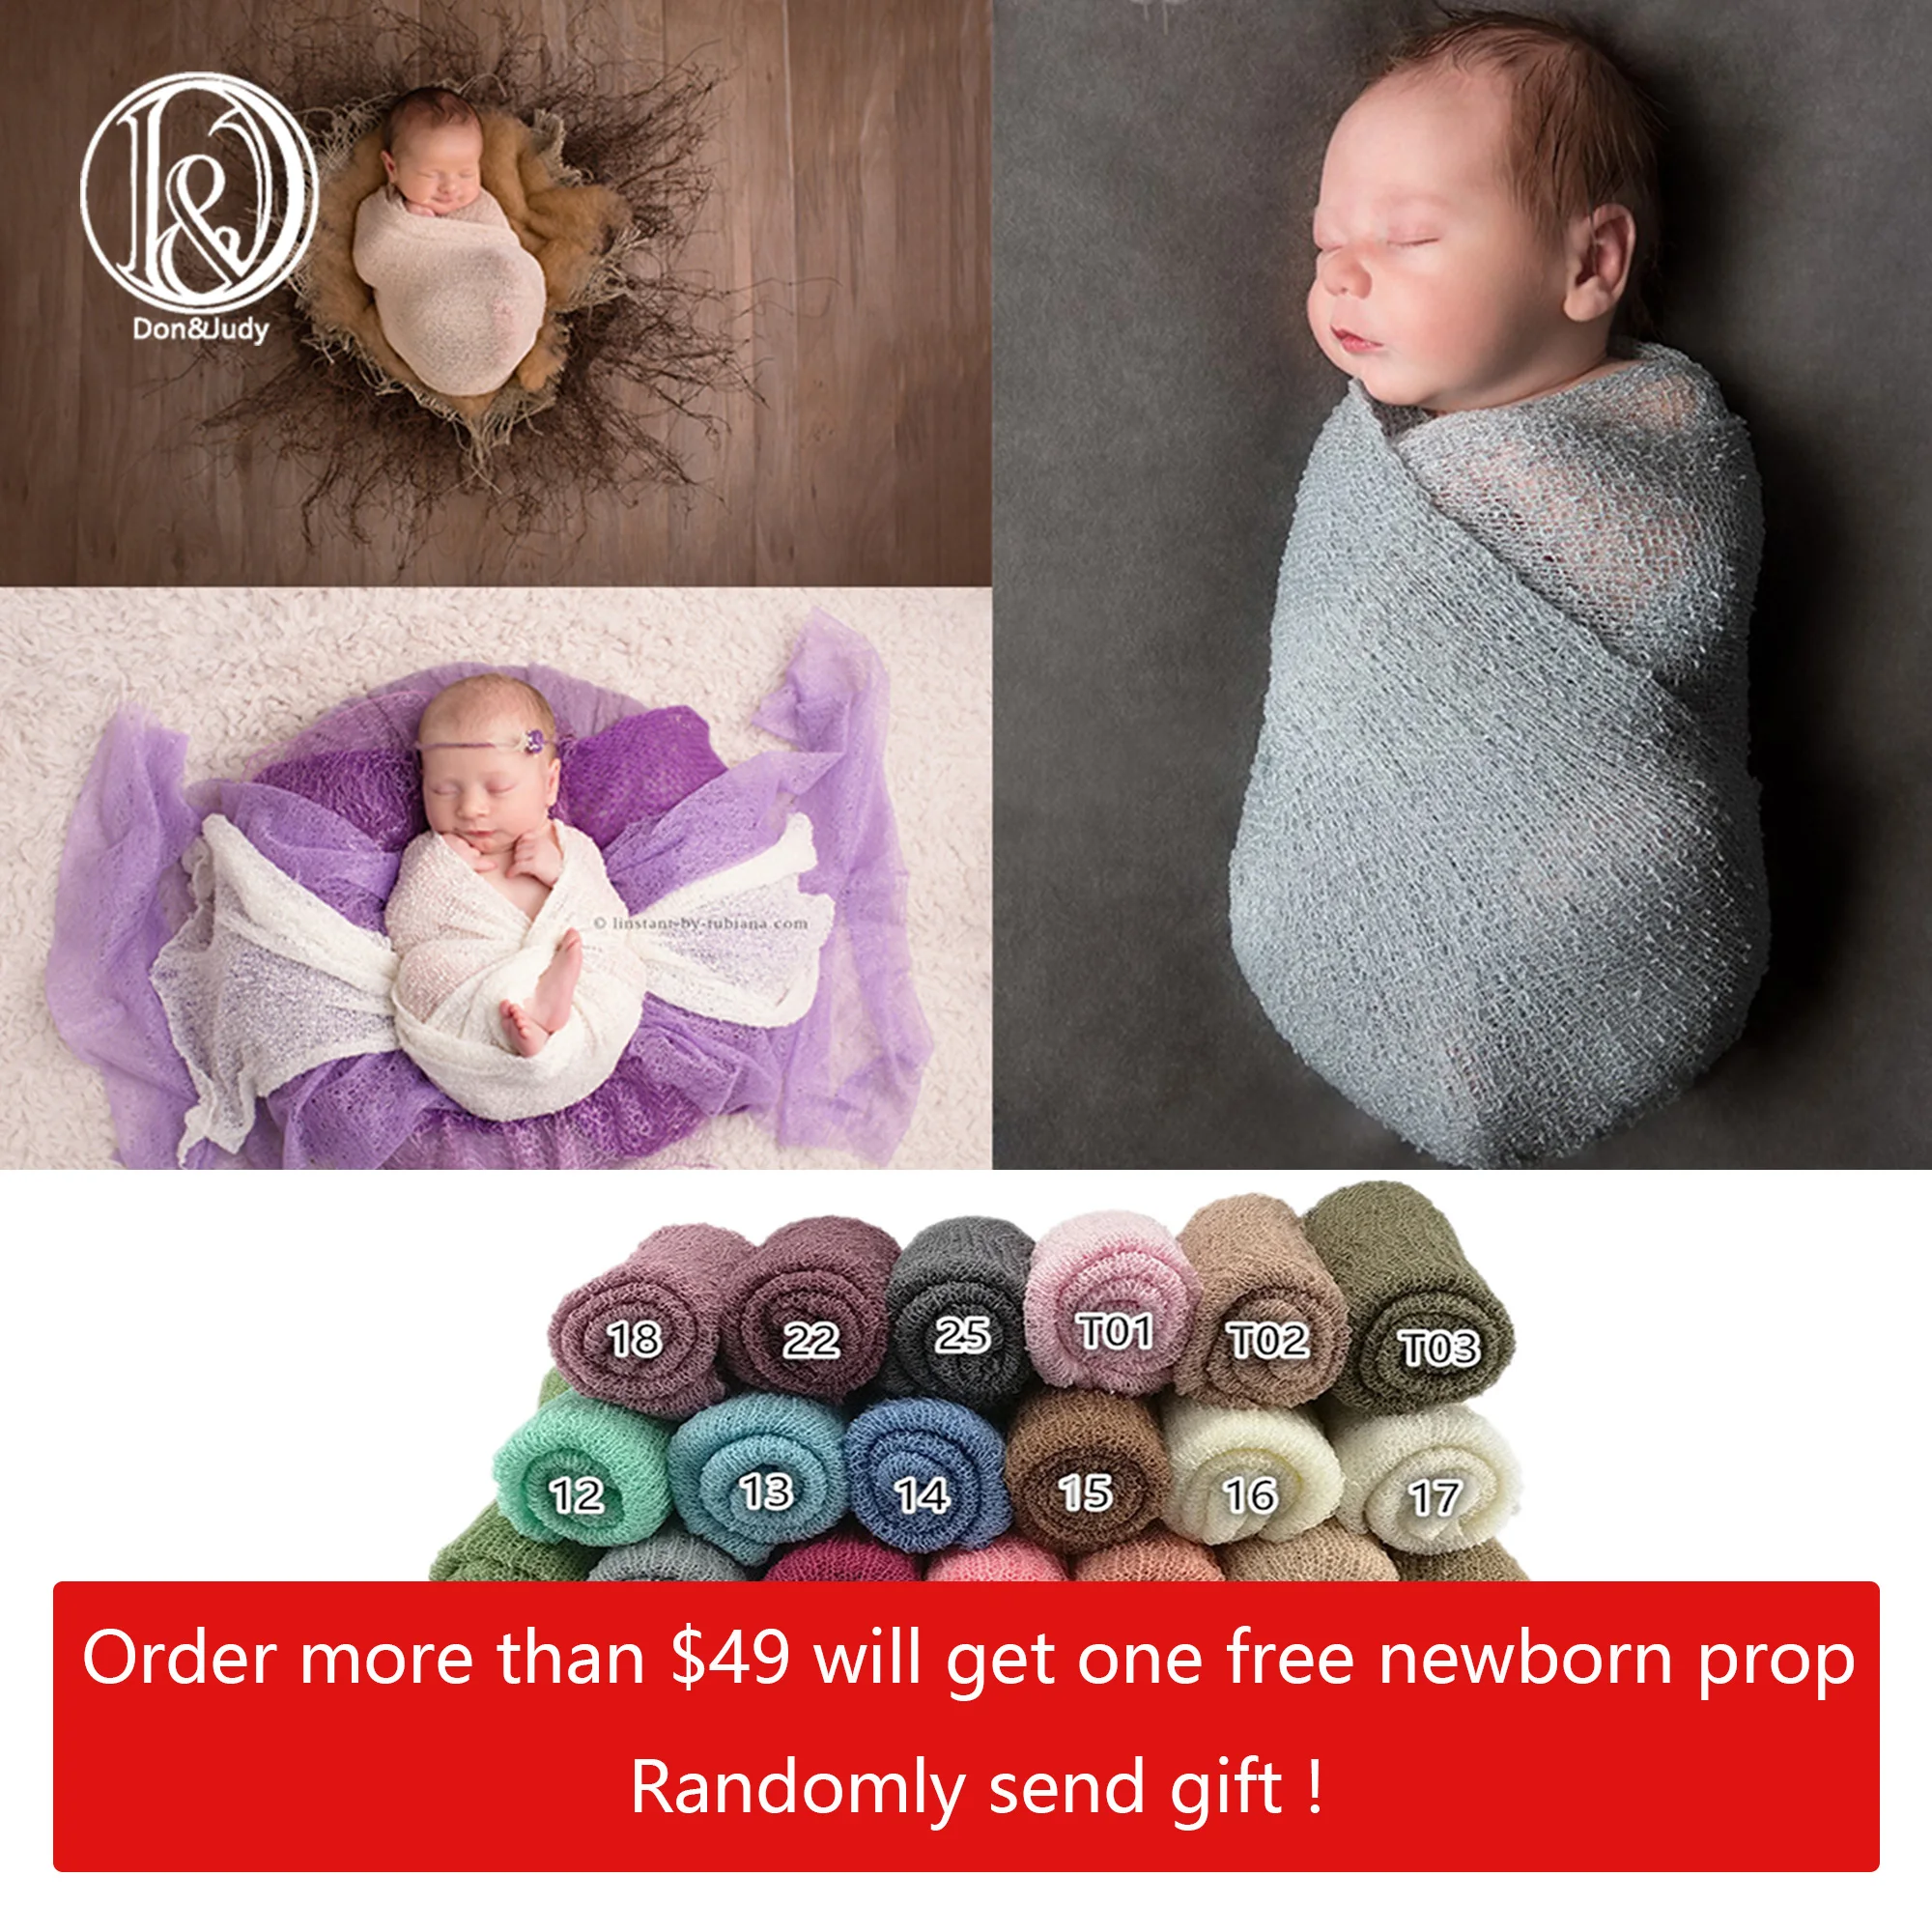 Soft Knit Stretchy Wraps Swaddle For Newborn Baby Photography Props Kids Receiving Blankets Cloth Accessories For Photo Shooting 75 50cm soft stretch knit mini ball bobble newborn wraps photography props baby photo shoot accessories photograph for studio